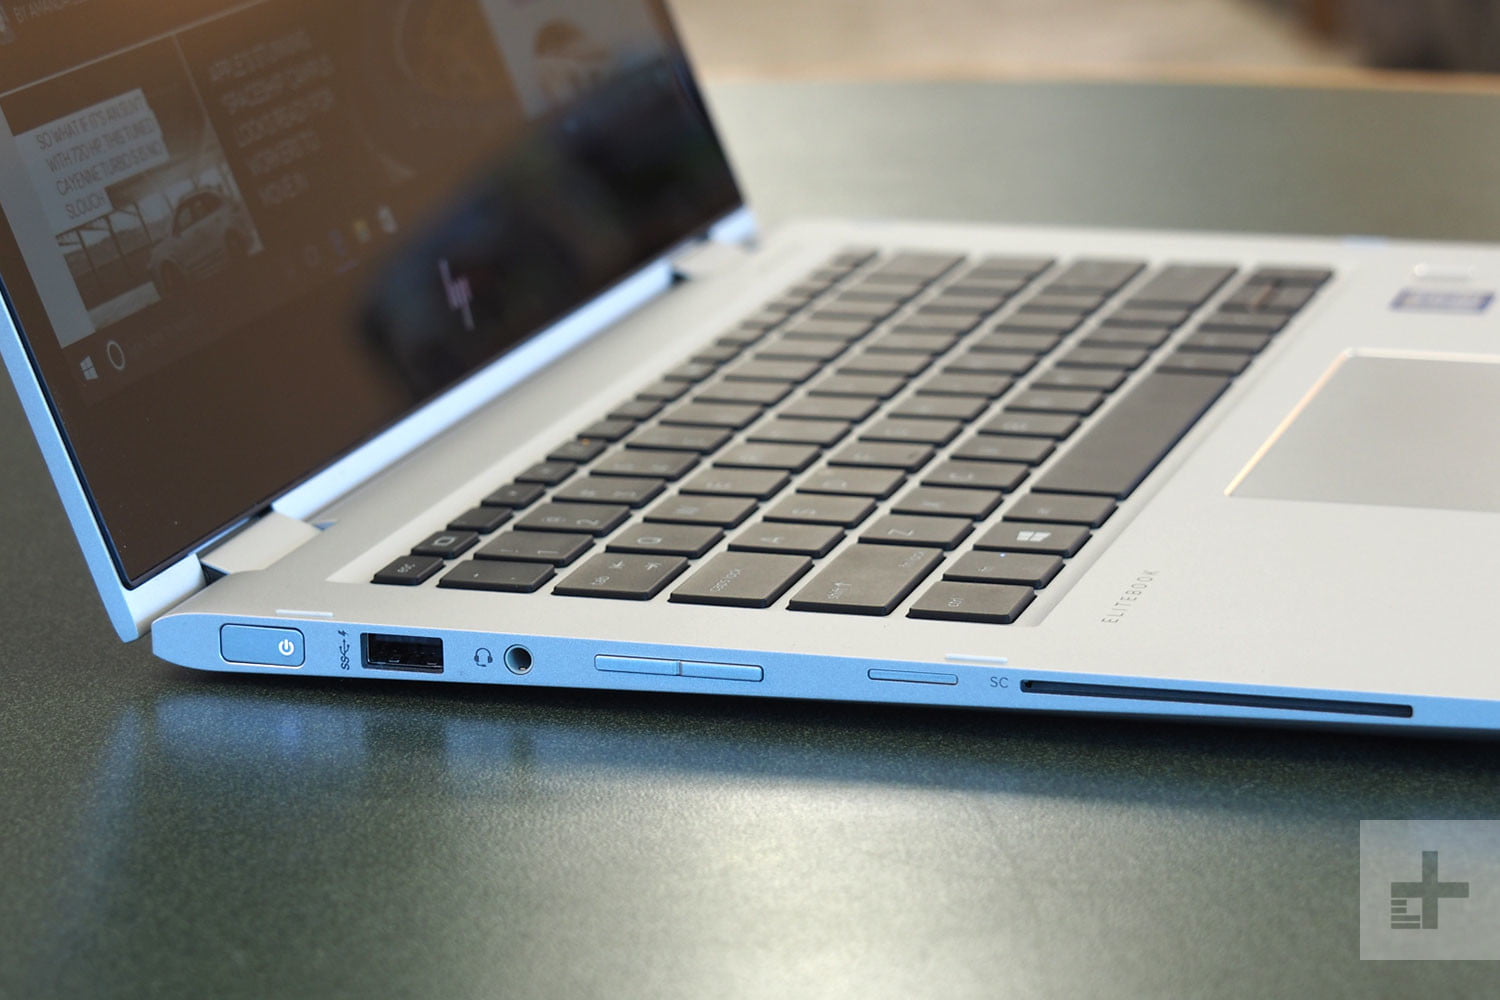 10 Best Laptops for Trading Forex and Stocks in 2019 - PC Tech Magazine